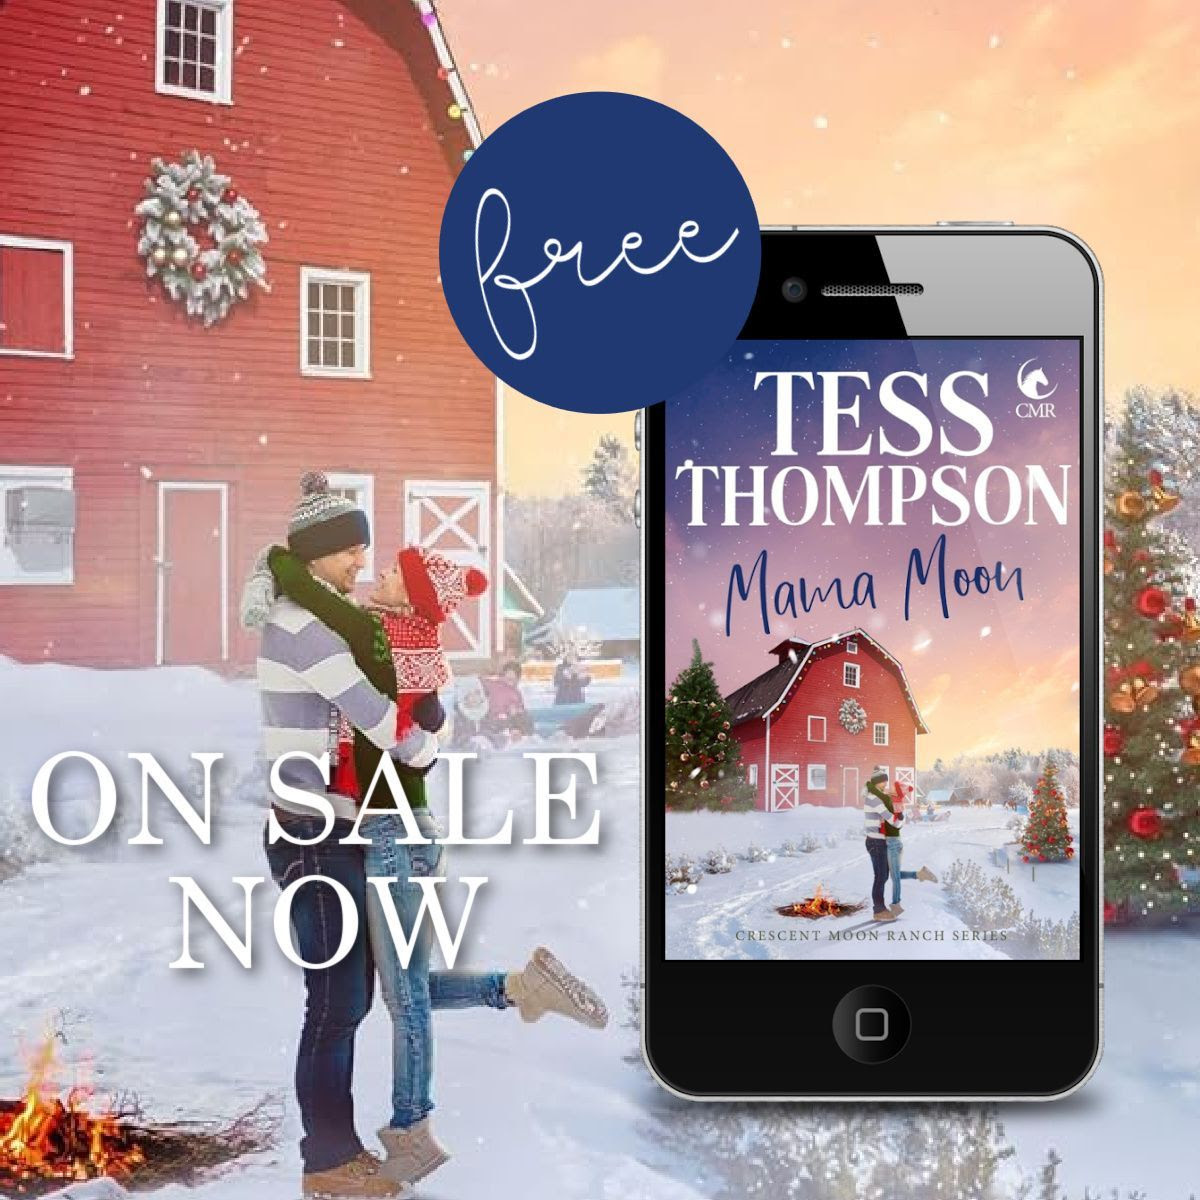 FREE WHOLESOME ROMANCE! This clean and wholesome series starter from USA Today Bestselling author Tess Thompson will warm hearts as Stella and Jasper make a family from the broken parts of trampled dreams in this opposites-attract, contemporary romance. geni.us/MamaMoon